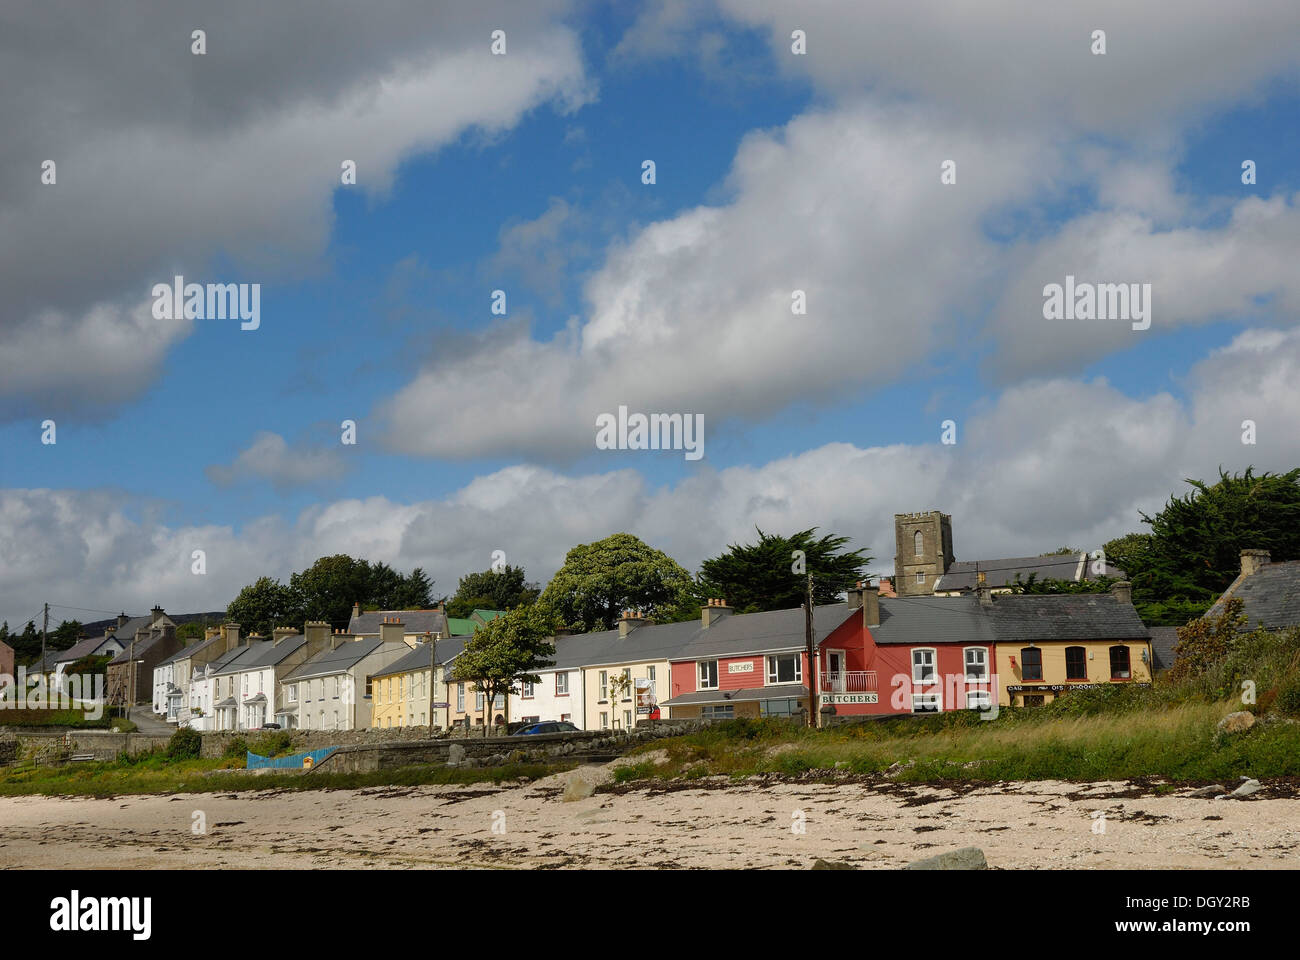 Big shower clouds over an Irish village with row of houses, Rathmullan, County Donegal, Ireland, Europe Stock Photo